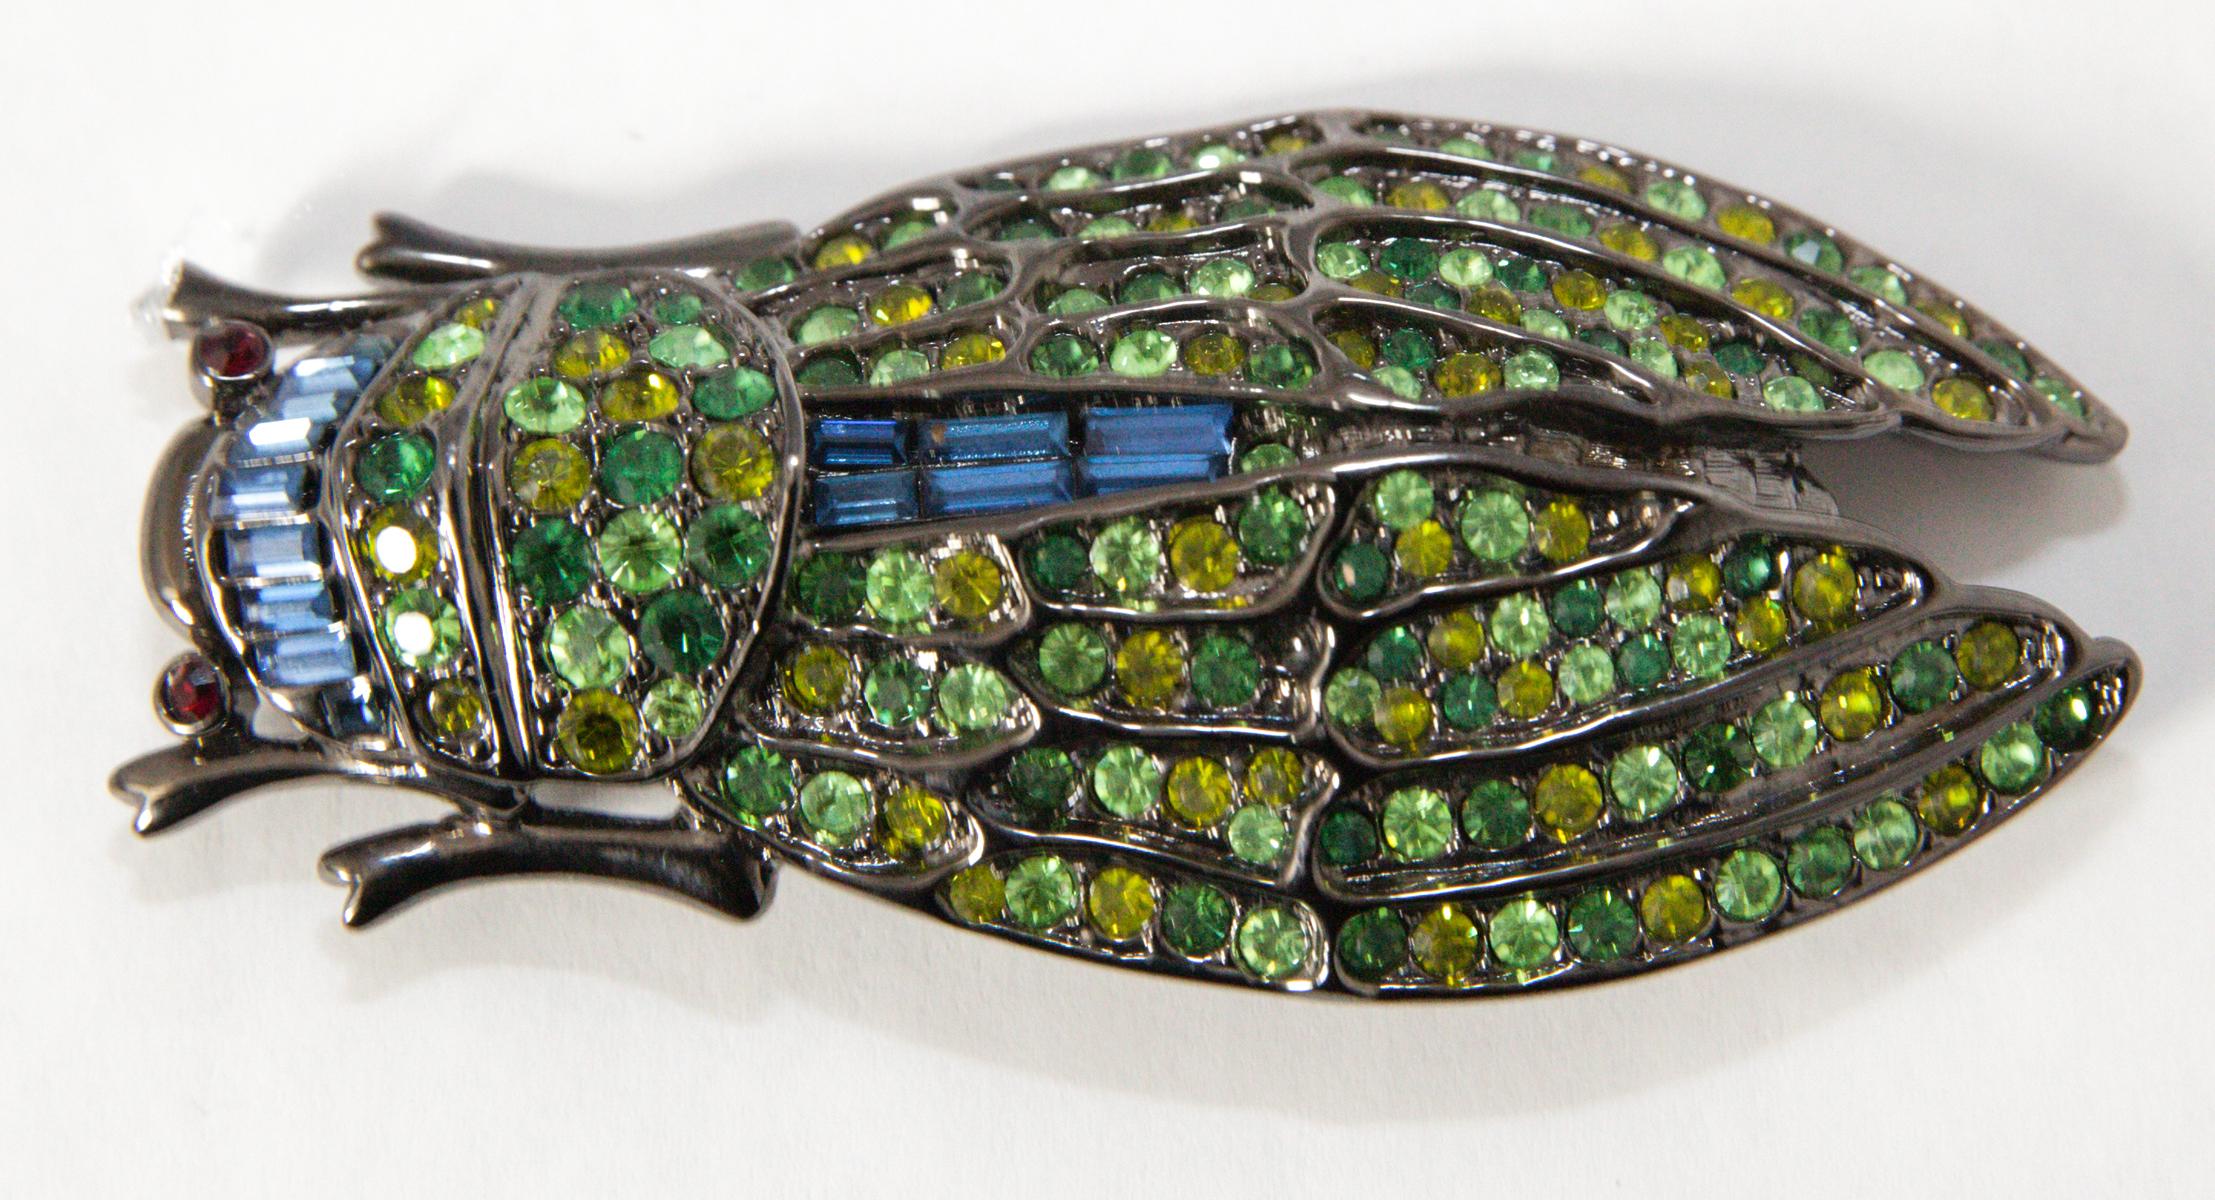 If you lived in Paris, you know they love Cicada jewelry and the woman collect as many as they can find.   You’ll love this Cicada brooch.  It has different hues of green crystals throughout its wings.  The head has blue crystals and red eyes in a